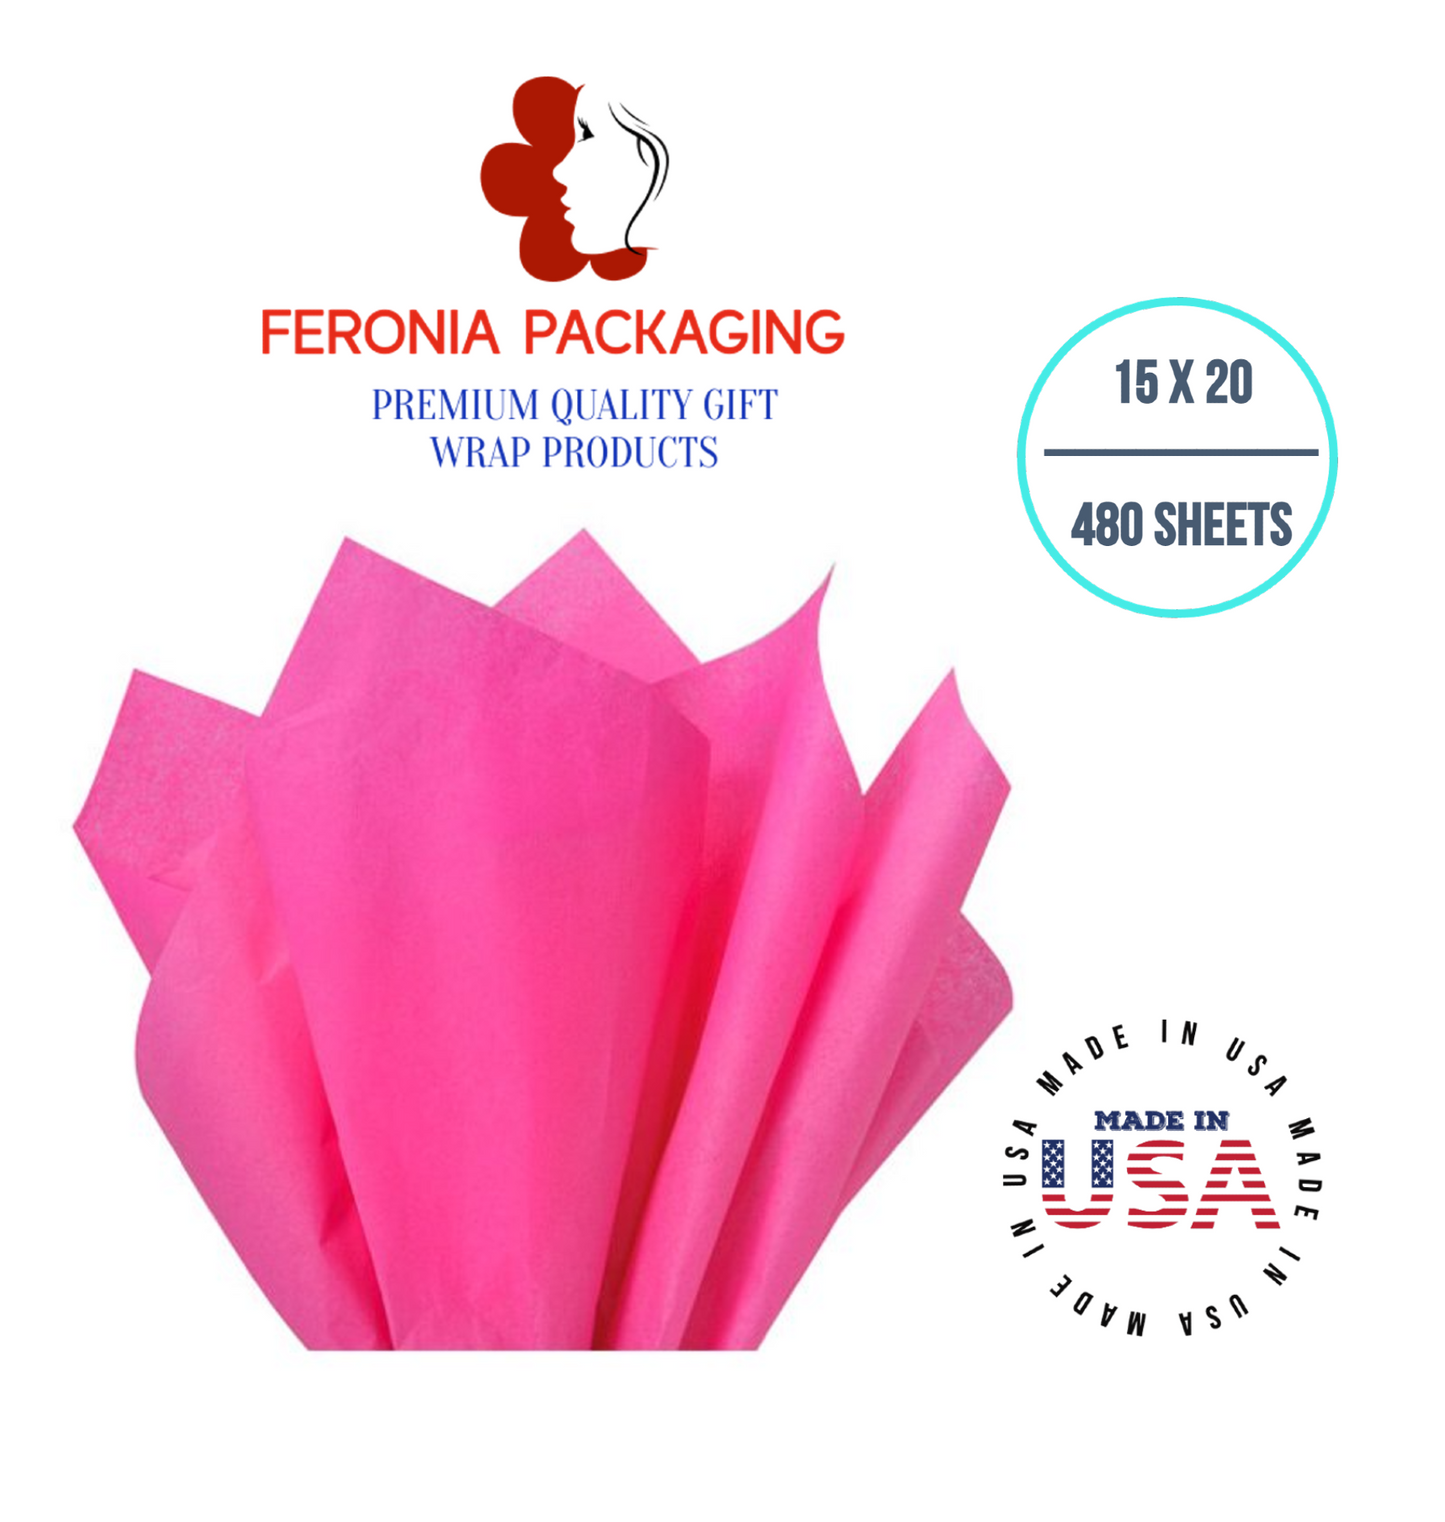 HotPink Tissue Paper Squares, Bulk 480 Sheets, Premium Gift Wrap and Art Supplies for Birthdays, Holidays, or Presents by Feronia packaging, Large 15 Inch x 20 Inch